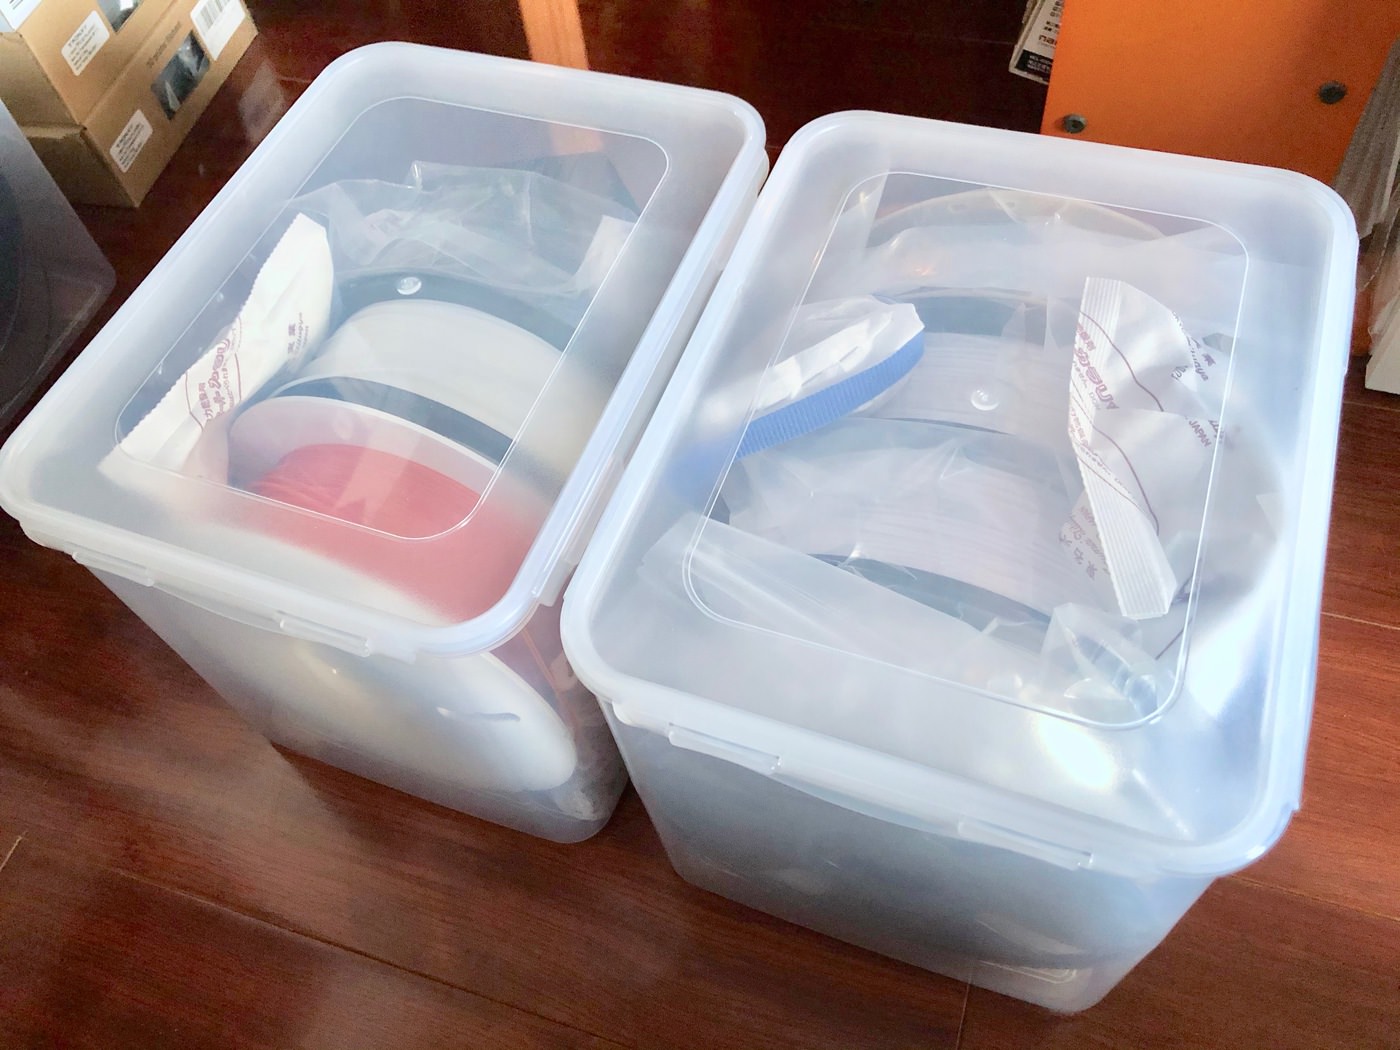 A dry box with a filament delivery function made using an airtight container from daiso 00026